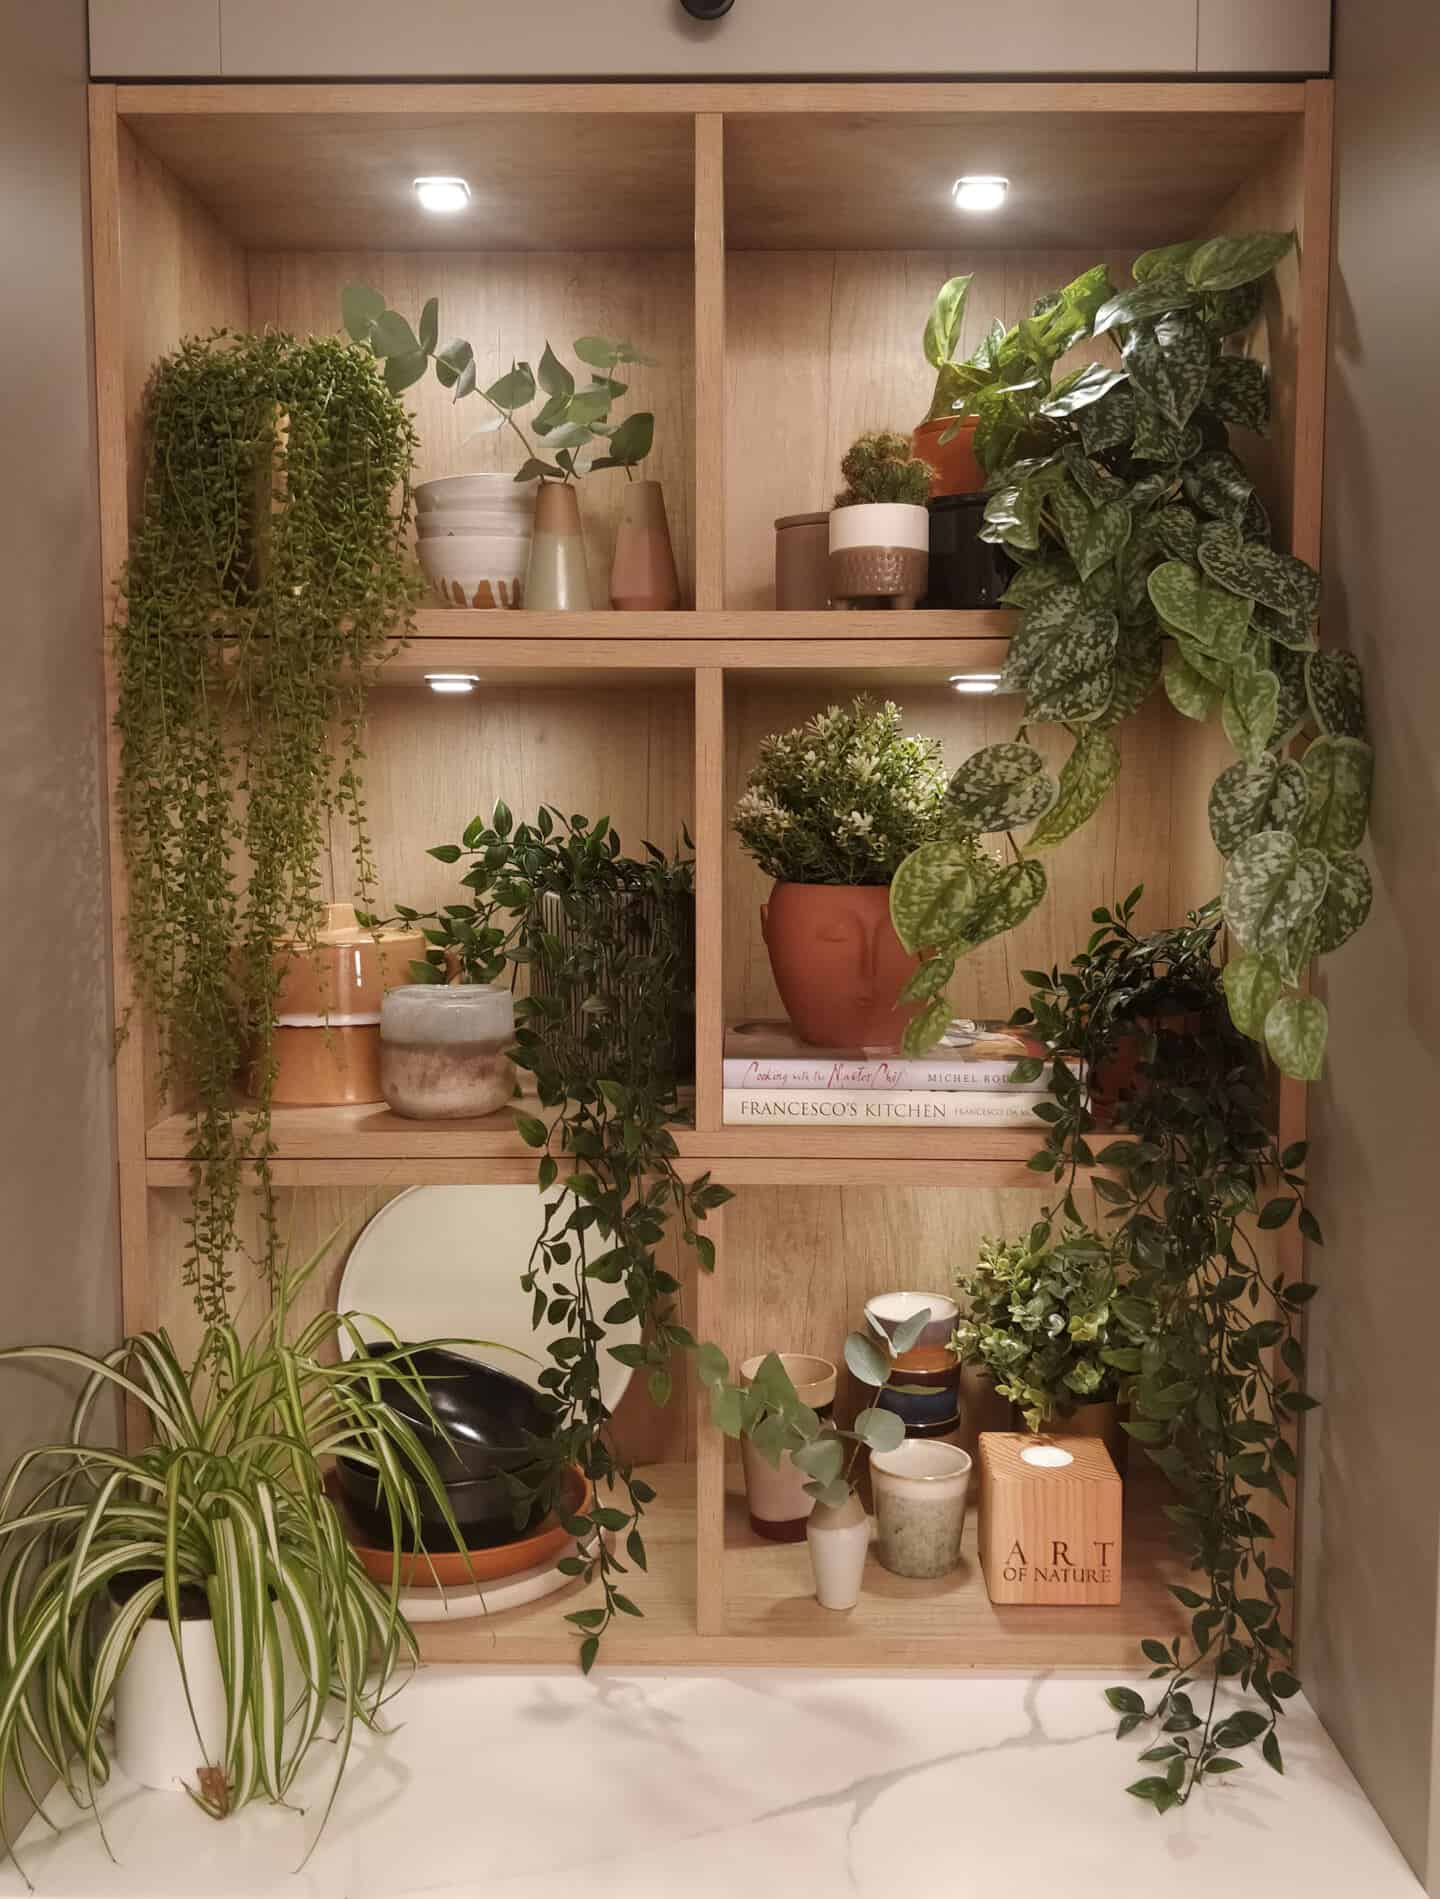 Built-in shelving in Magnet's Tatton Kitchen has been filled with plants and accessories according to the principles of biophilic design